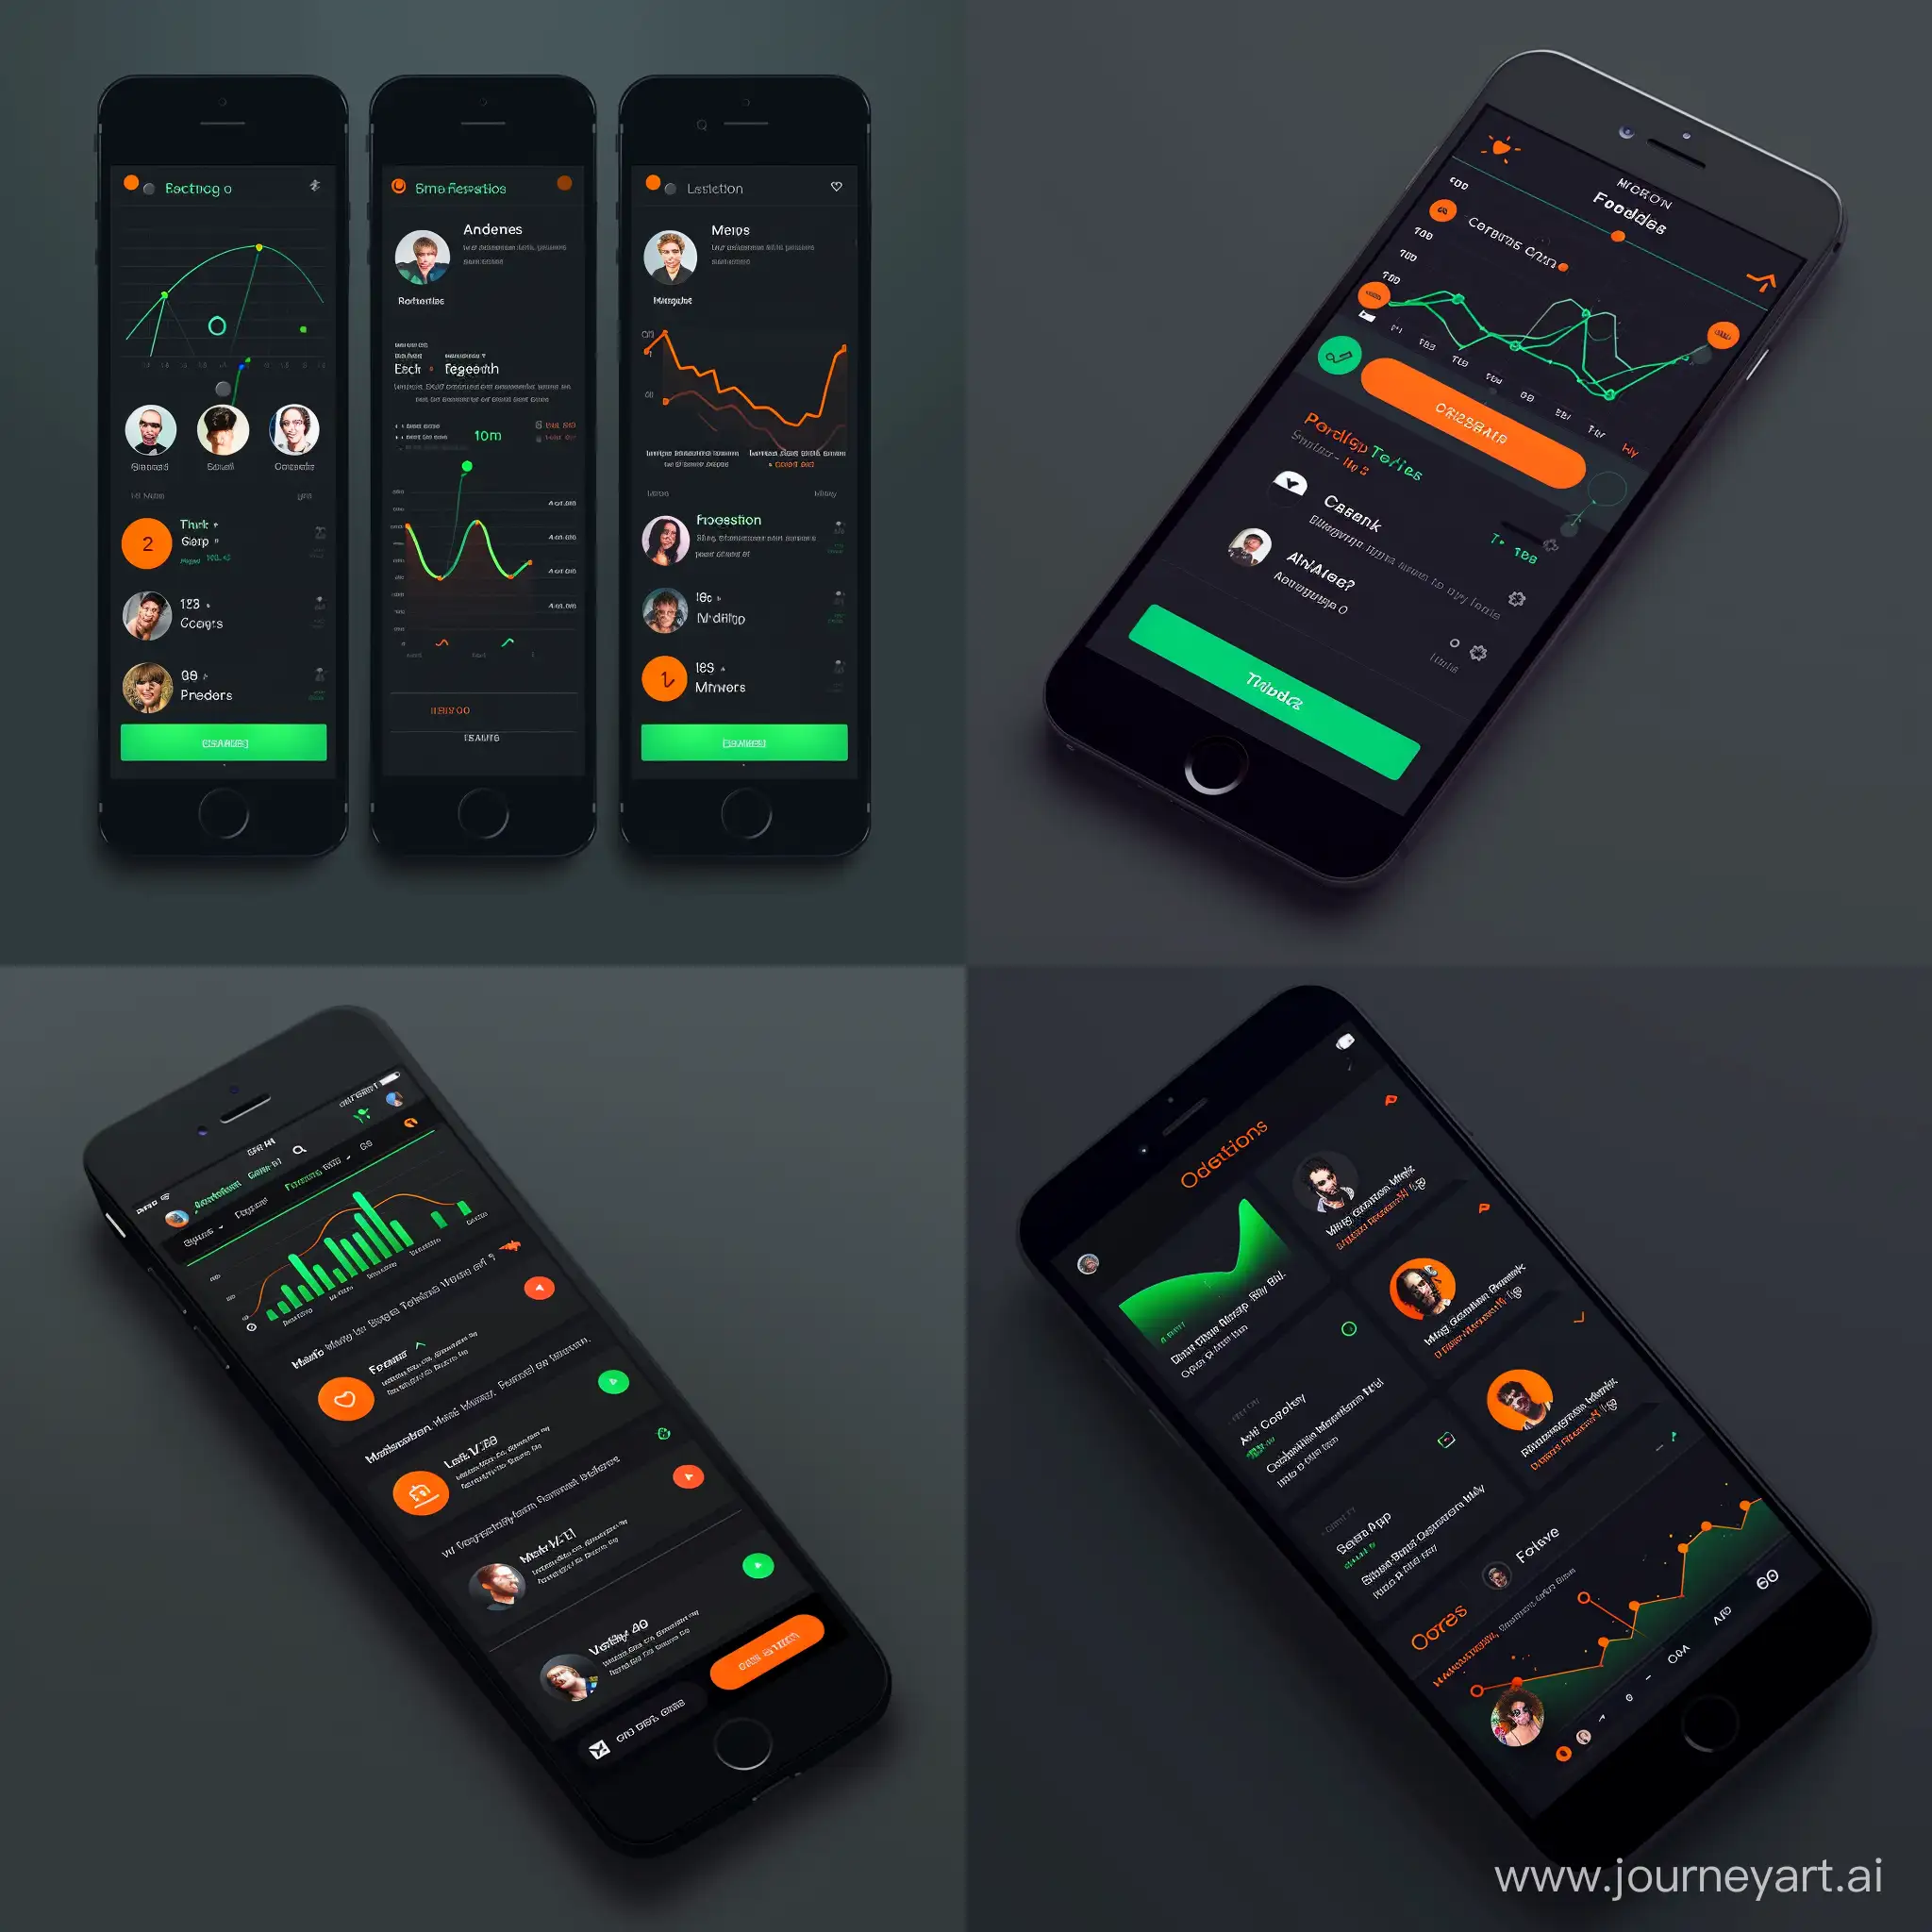 tech inspired ios app
main color : dark
main accent : green
light accent : orange

Top - Graph
Middle - button
Middle - Friends
Bottom- Nav bar